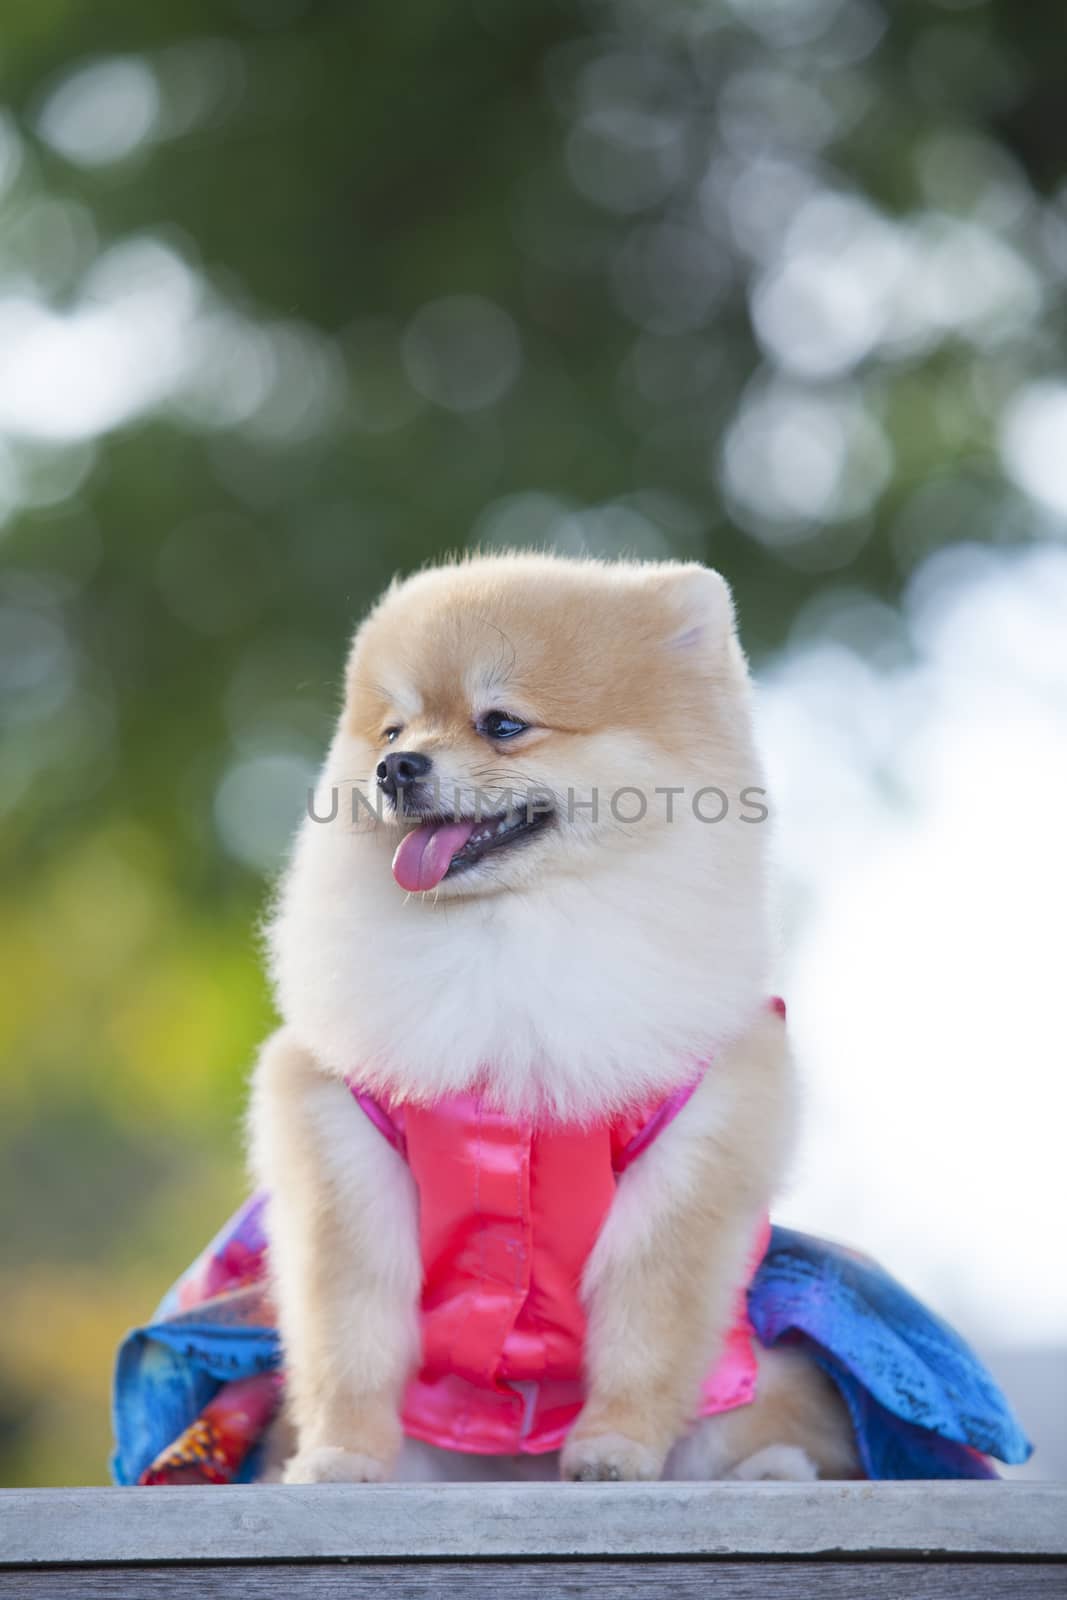 A beautiful little full body of a Pomeranian dog with cute expression in the face standing and watching other dogs in the park outdoors